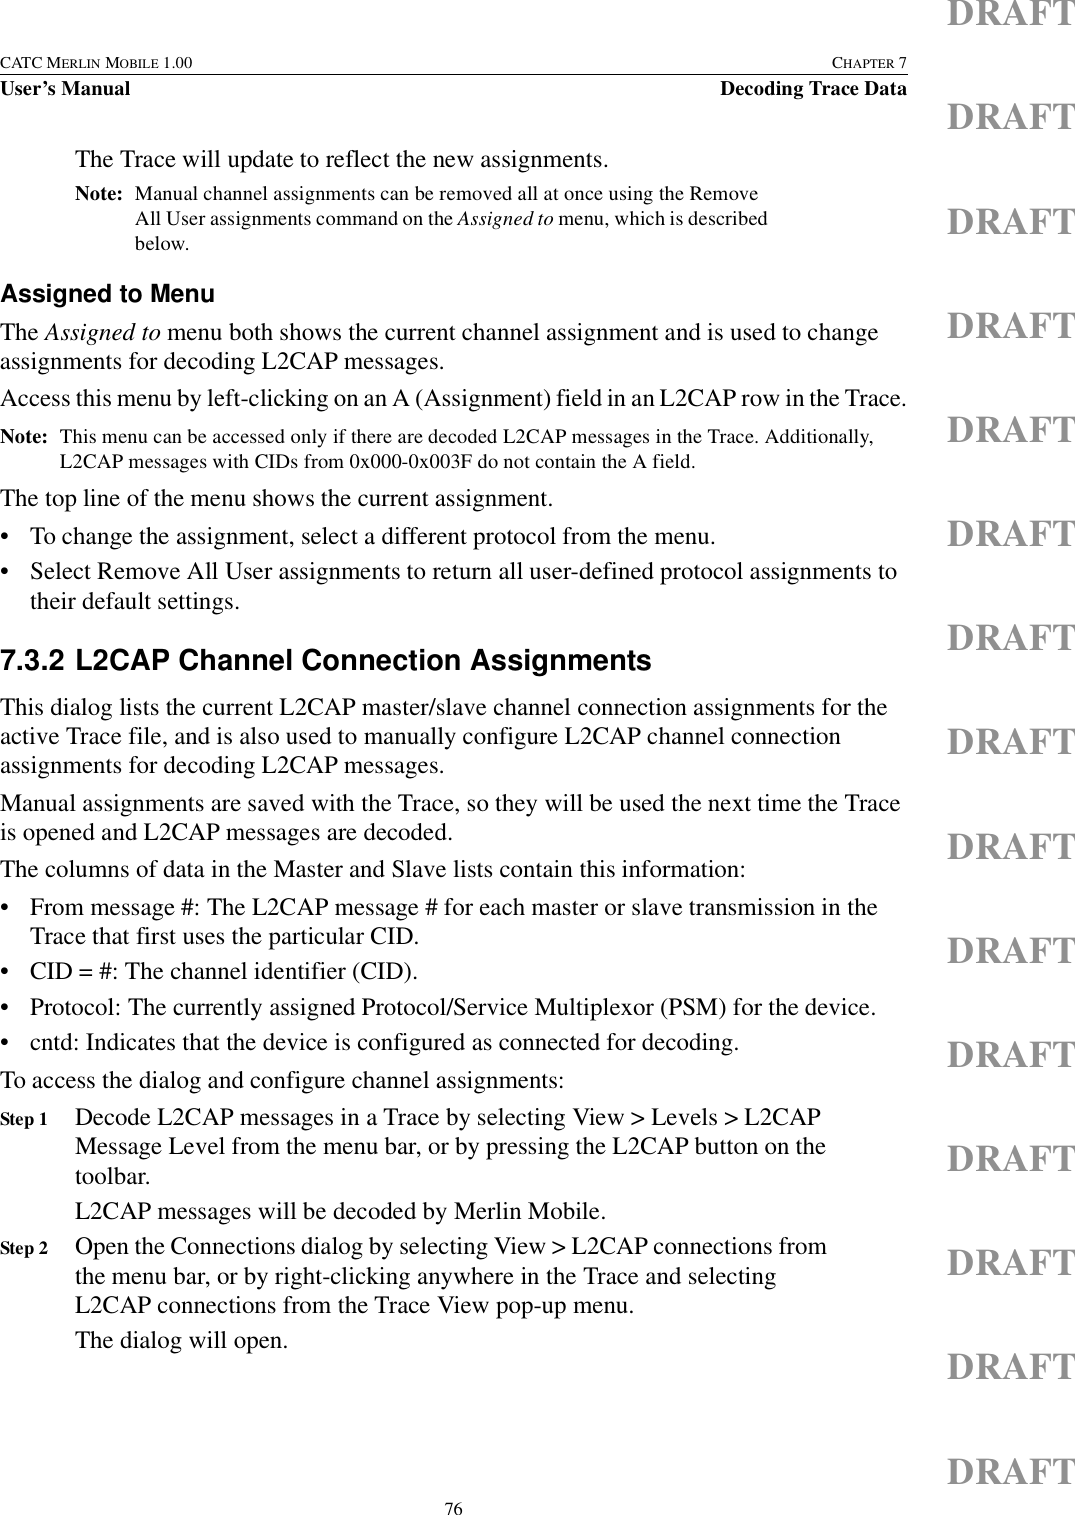 76CATC MERLIN MOBILE 1.00 CHAPTER 7User’s Manual Decoding Trace DataDRAFTDRAFTDRAFTDRAFTDRAFTDRAFTDRAFTDRAFTDRAFTDRAFTDRAFTDRAFTDRAFTDRAFTDRAFTThe Trace will update to reflect the new assignments.Note: Manual channel assignments can be removed all at once using the Remove All User assignments command on the Assigned to menu, which is described below.Assigned to MenuThe Assigned to menu both shows the current channel assignment and is used to change assignments for decoding L2CAP messages.Access this menu by left-clicking on an A (Assignment) field in an L2CAP row in the Trace.Note: This menu can be accessed only if there are decoded L2CAP messages in the Trace. Additionally, L2CAP messages with CIDs from 0x000-0x003F do not contain the A field.The top line of the menu shows the current assignment.• To change the assignment, select a different protocol from the menu.• Select Remove All User assignments to return all user-defined protocol assignments to their default settings.7.3.2 L2CAP Channel Connection AssignmentsThis dialog lists the current L2CAP master/slave channel connection assignments for the active Trace file, and is also used to manually configure L2CAP channel connection assignments for decoding L2CAP messages.Manual assignments are saved with the Trace, so they will be used the next time the Trace is opened and L2CAP messages are decoded.The columns of data in the Master and Slave lists contain this information:• From message #: The L2CAP message # for each master or slave transmission in the Trace that first uses the particular CID.• CID = #: The channel identifier (CID).• Protocol: The currently assigned Protocol/Service Multiplexor (PSM) for the device.• cntd: Indicates that the device is configured as connected for decoding.To access the dialog and configure channel assignments:Step 1 Decode L2CAP messages in a Trace by selecting View &gt; Levels &gt; L2CAP Message Level from the menu bar, or by pressing the L2CAP button on the toolbar.L2CAP messages will be decoded by Merlin Mobile.Step 2 Open the Connections dialog by selecting View &gt; L2CAP connections from the menu bar, or by right-clicking anywhere in the Trace and selecting L2CAP connections from the Trace View pop-up menu.The dialog will open.